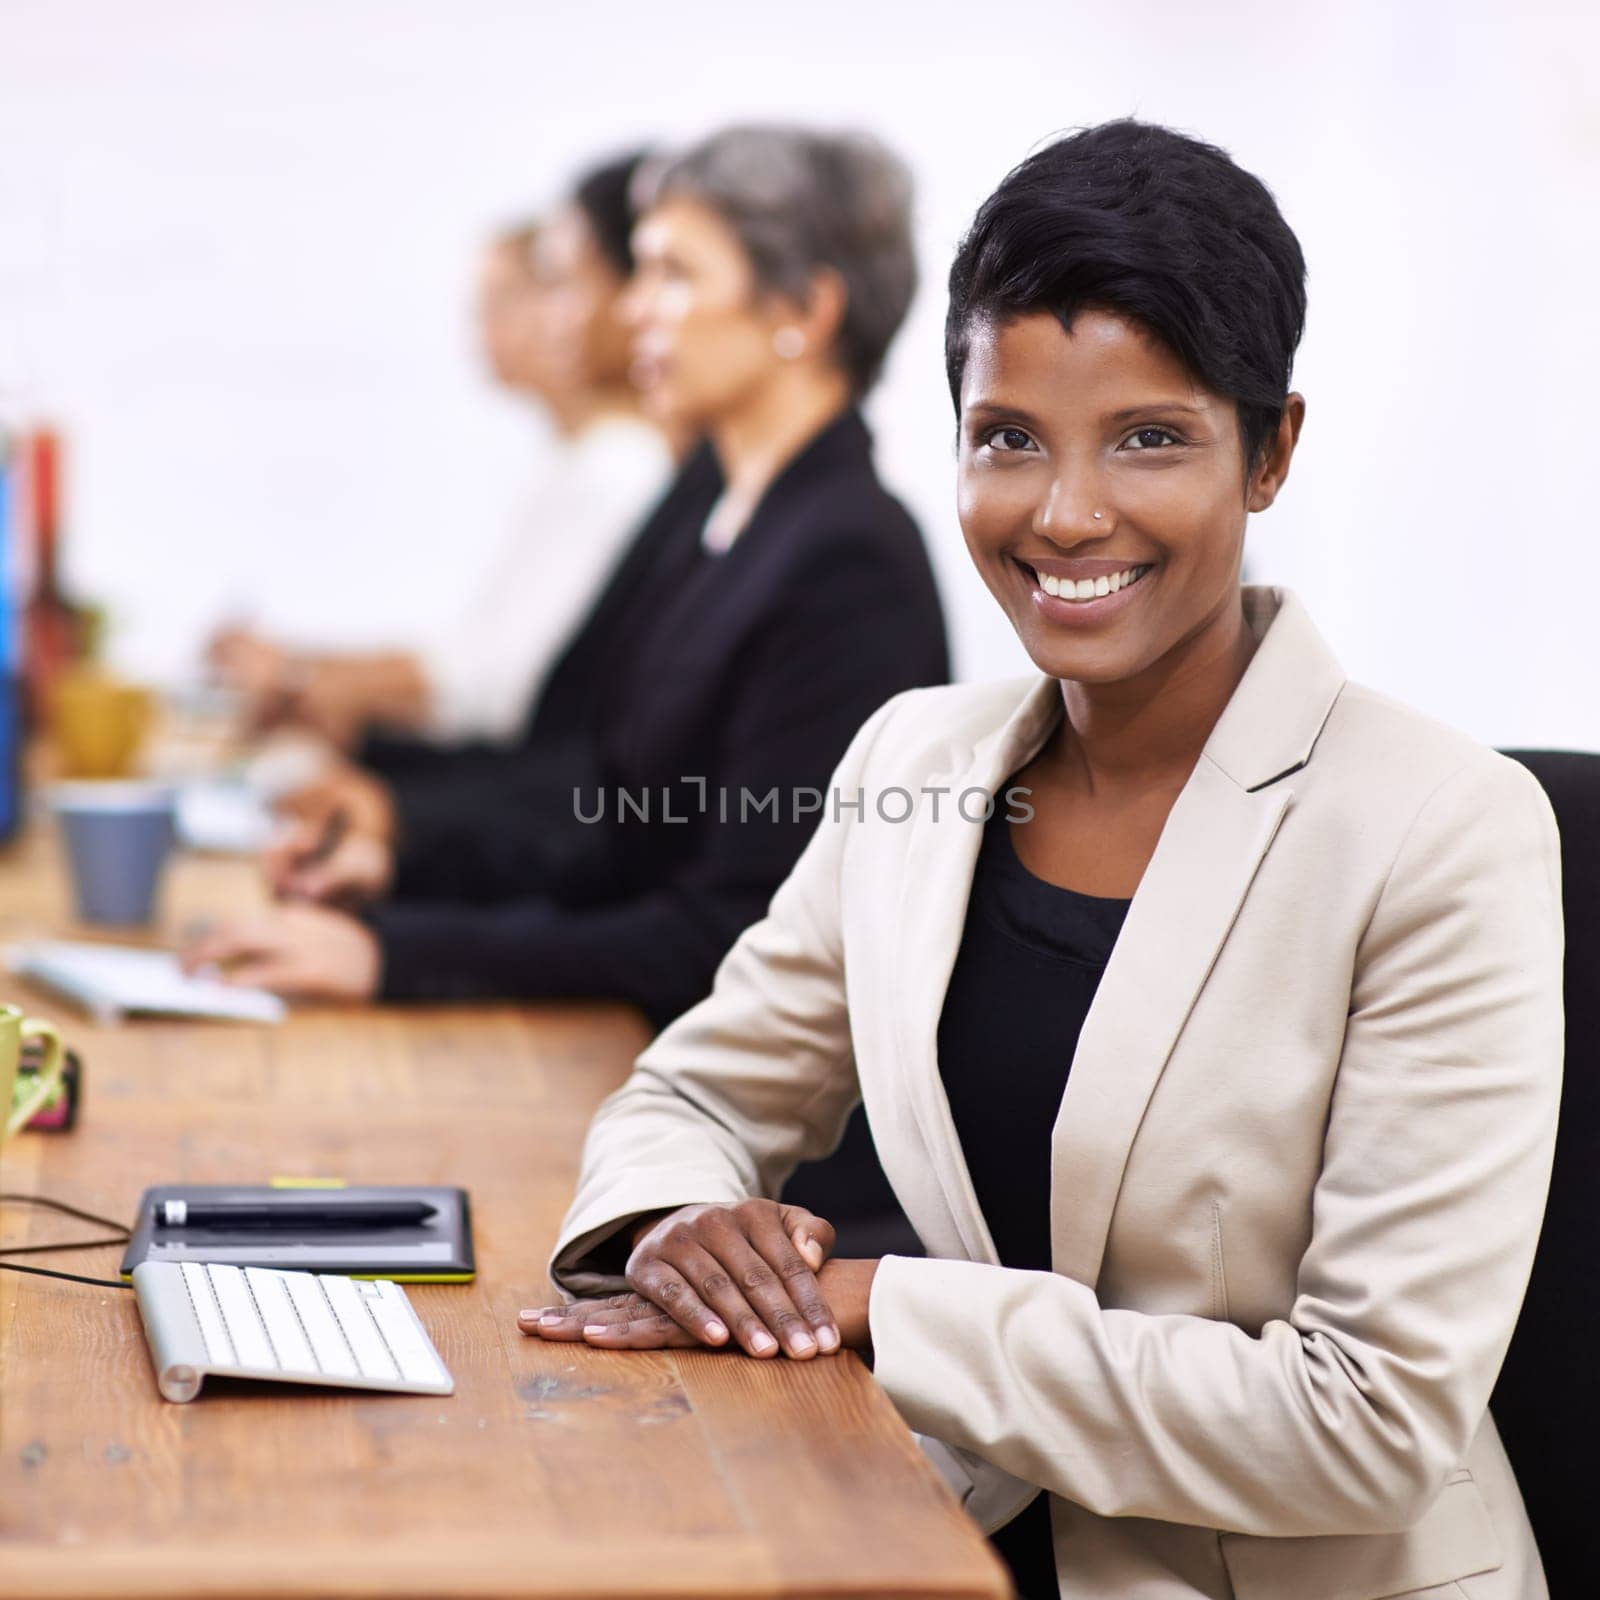 Happy woman, portrait and professional with confidence at office for business, design or creative startup. Face of female person, agent or employee with smile, career ambition or agency at workplace.